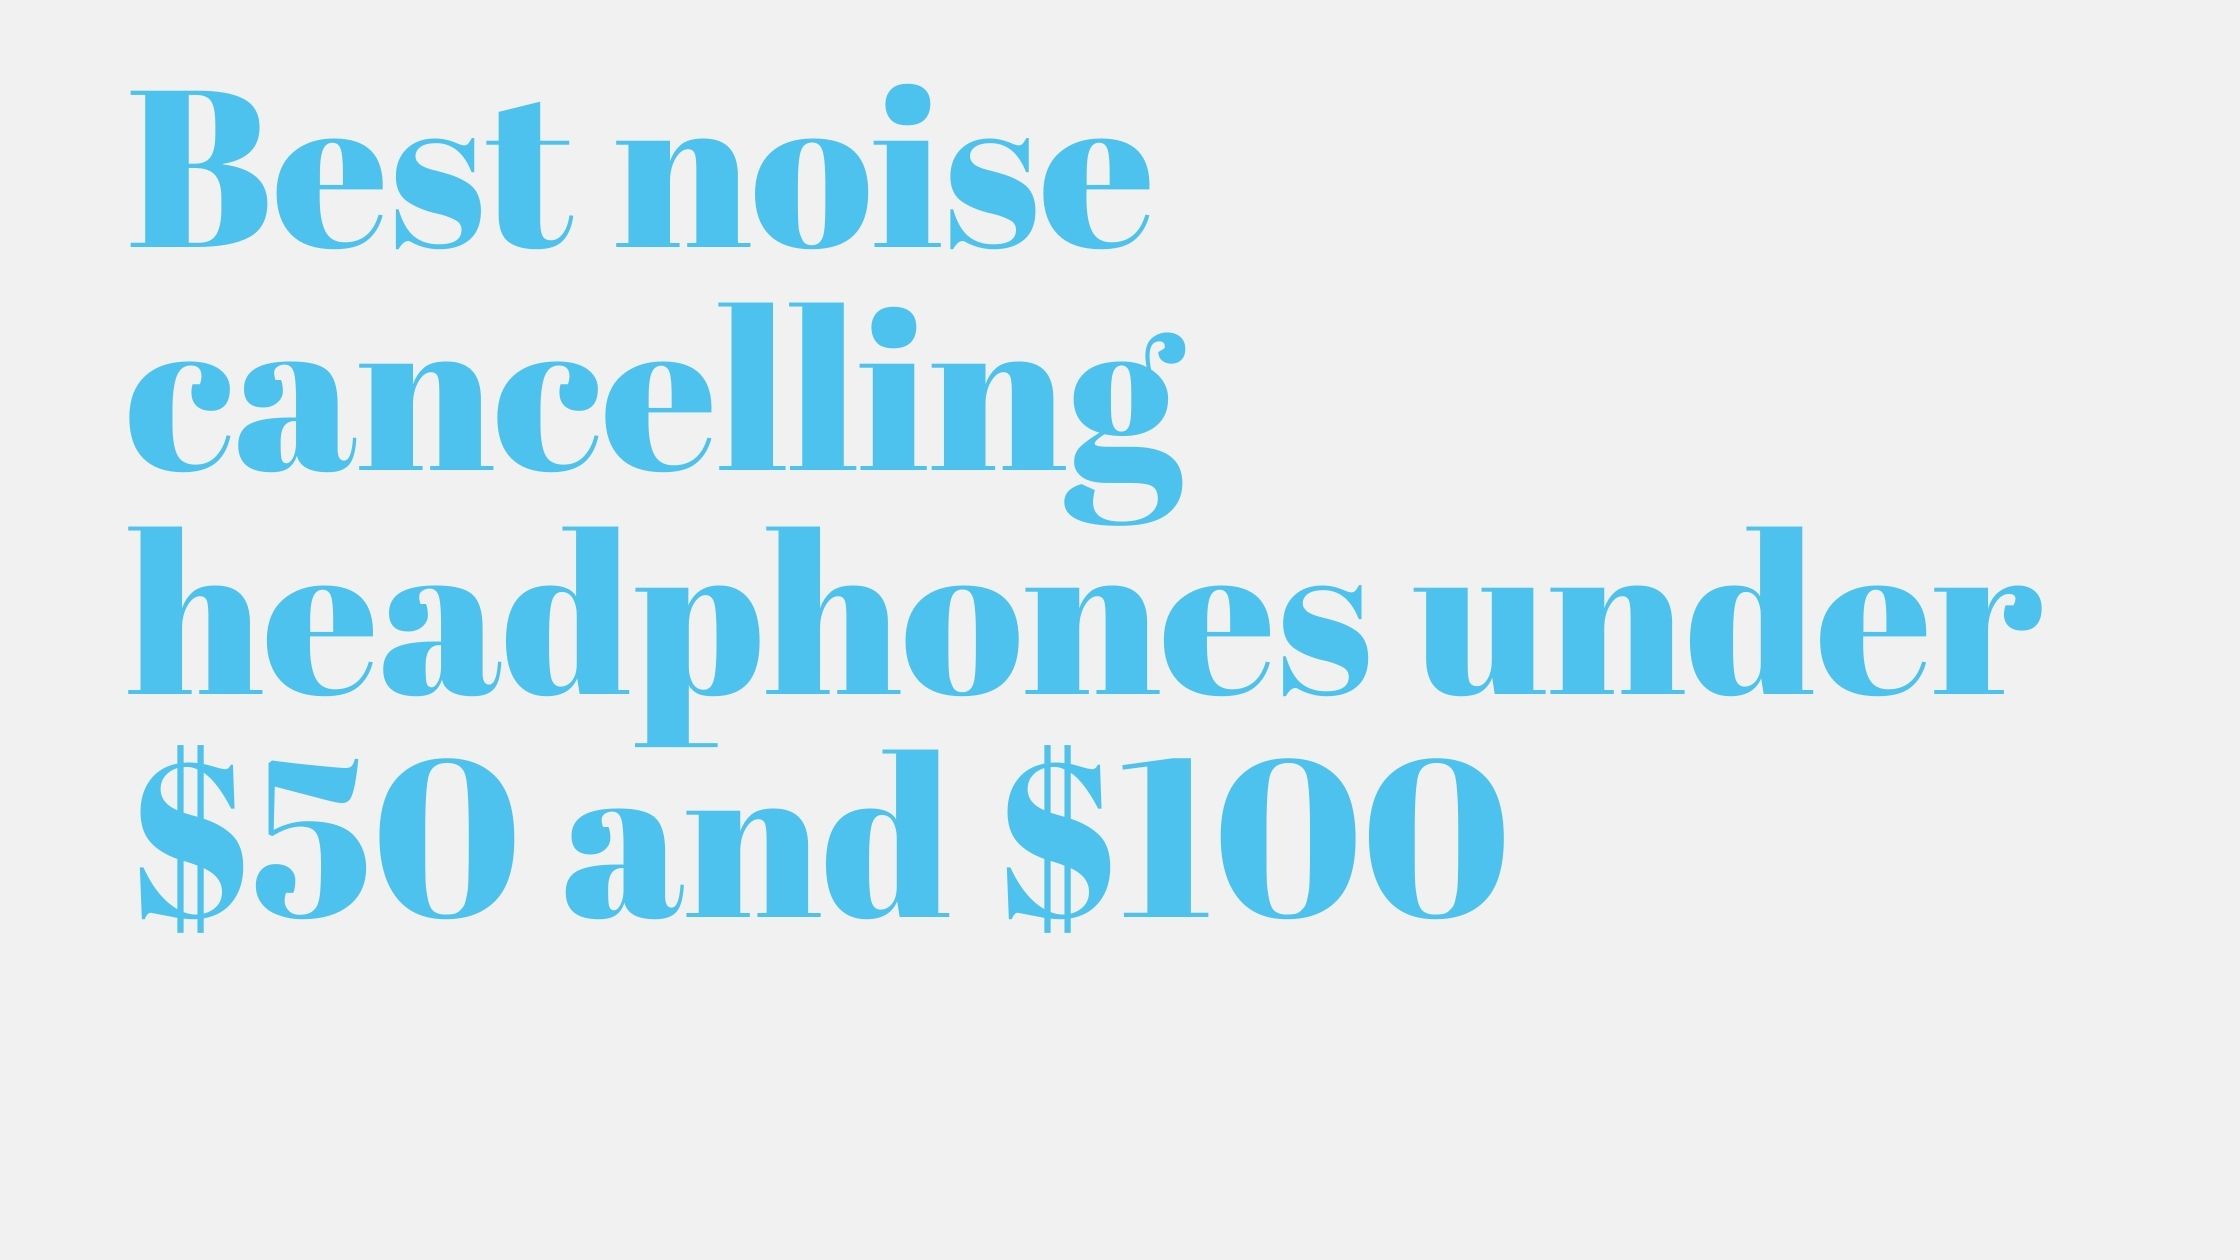 11 Best noise cancelling headphones under $50 and $100